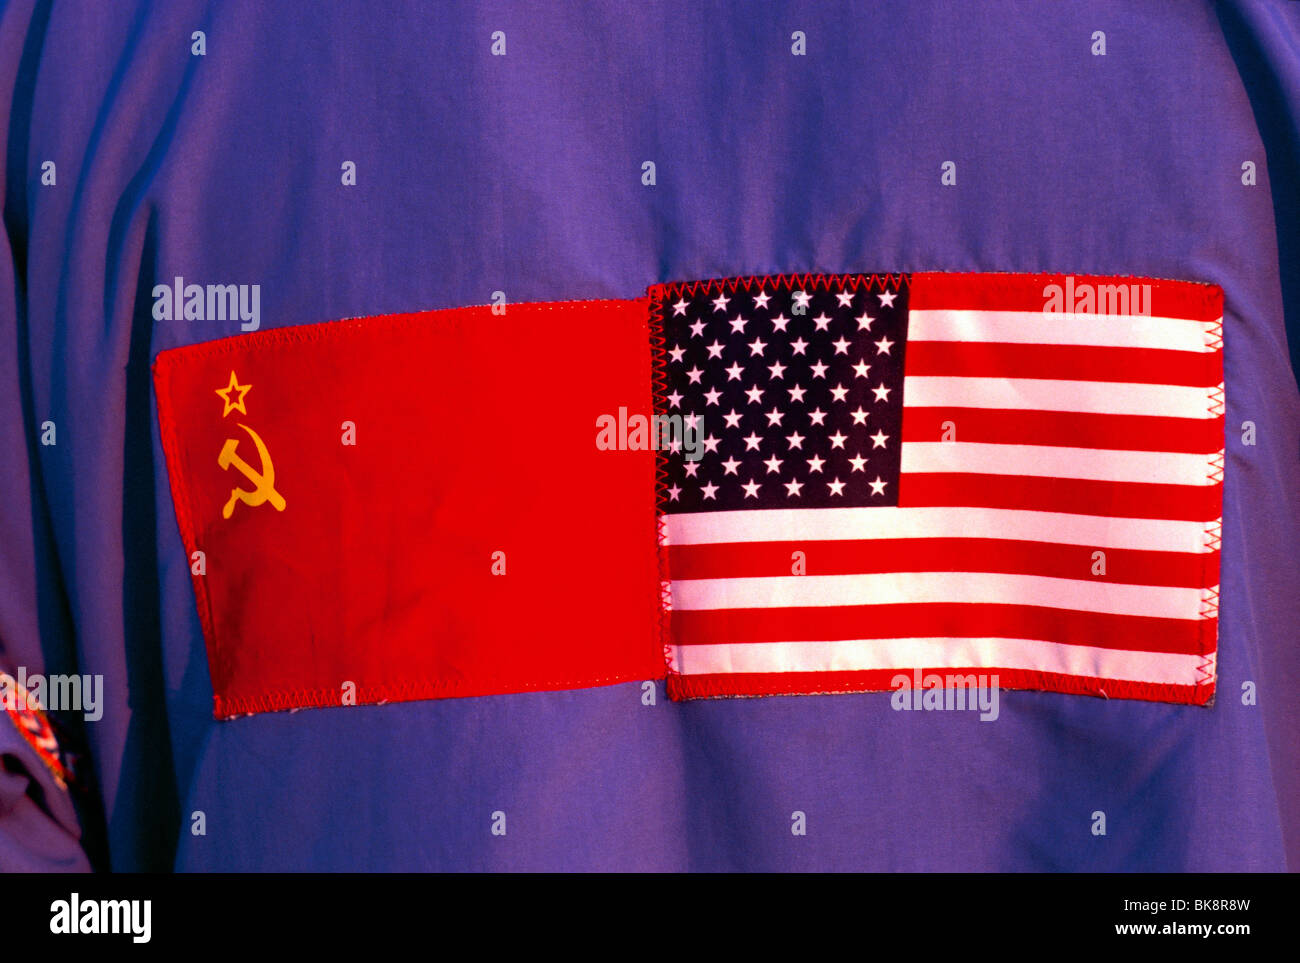 Patch on a parka symbolizes the new friendship between the former Soviet Union (USSR) and the United States of America Stock Photo